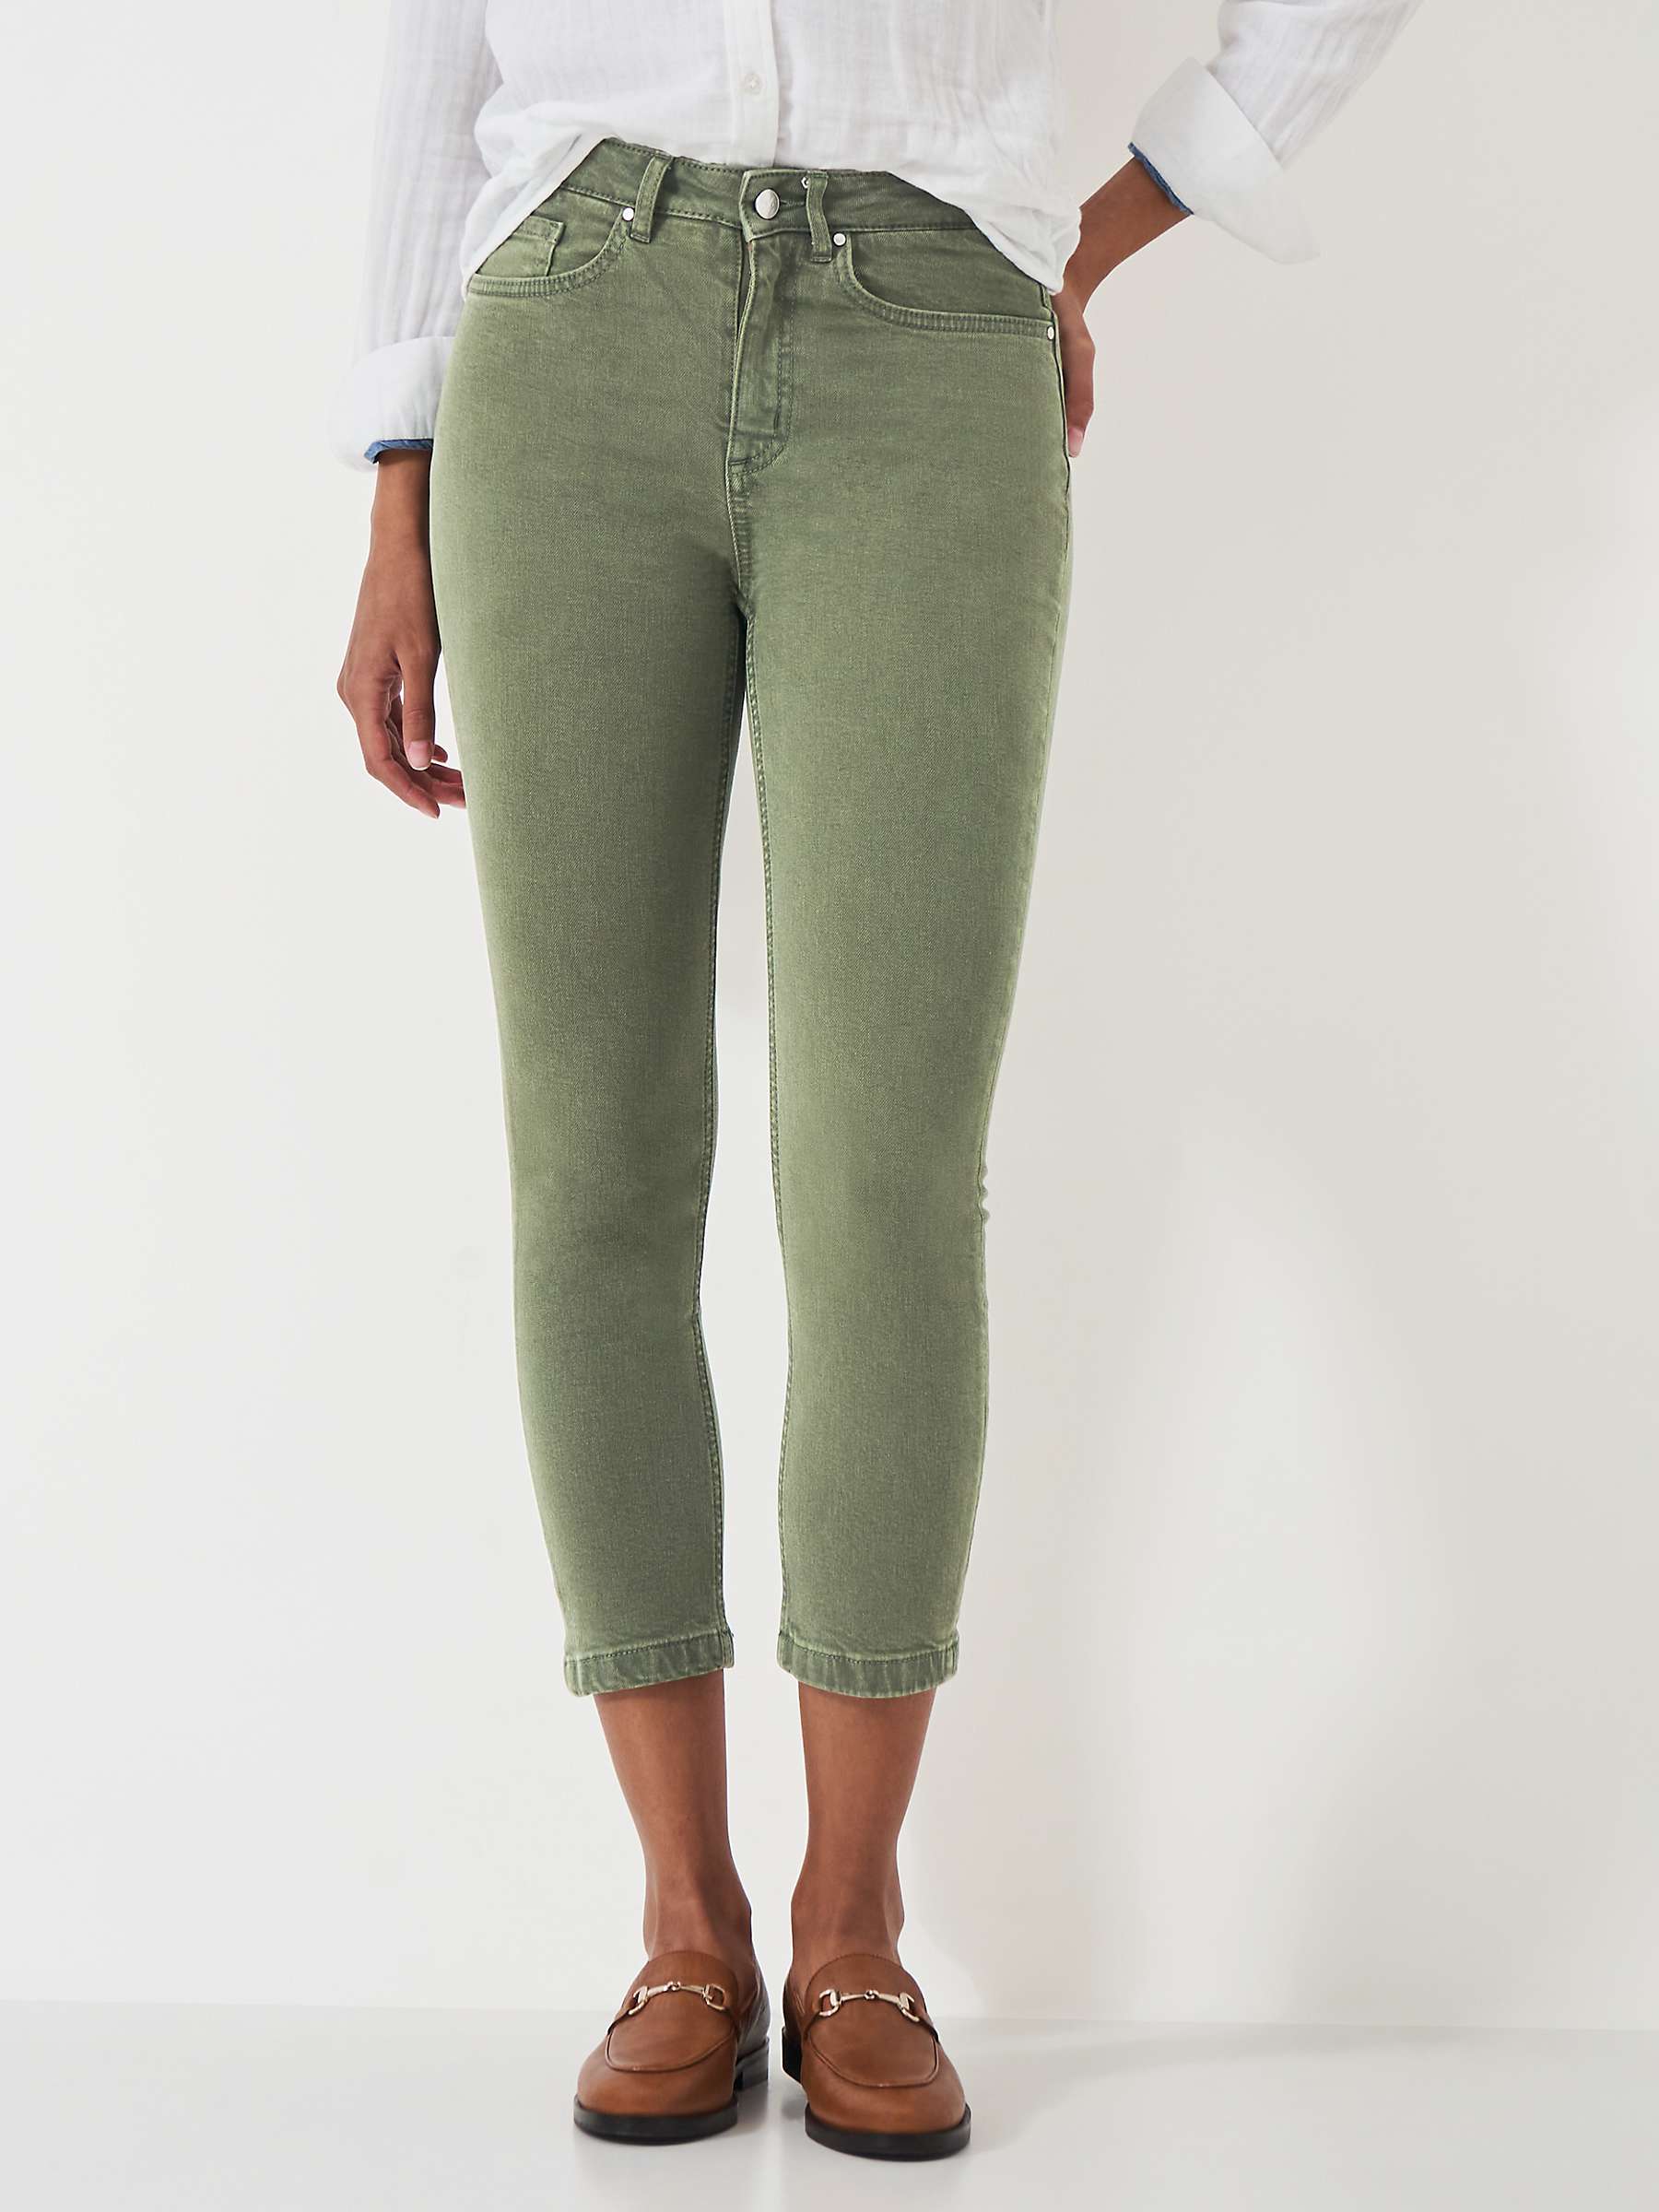 Buy Crew Clothing Cropped Jeans, Khaki Online at johnlewis.com